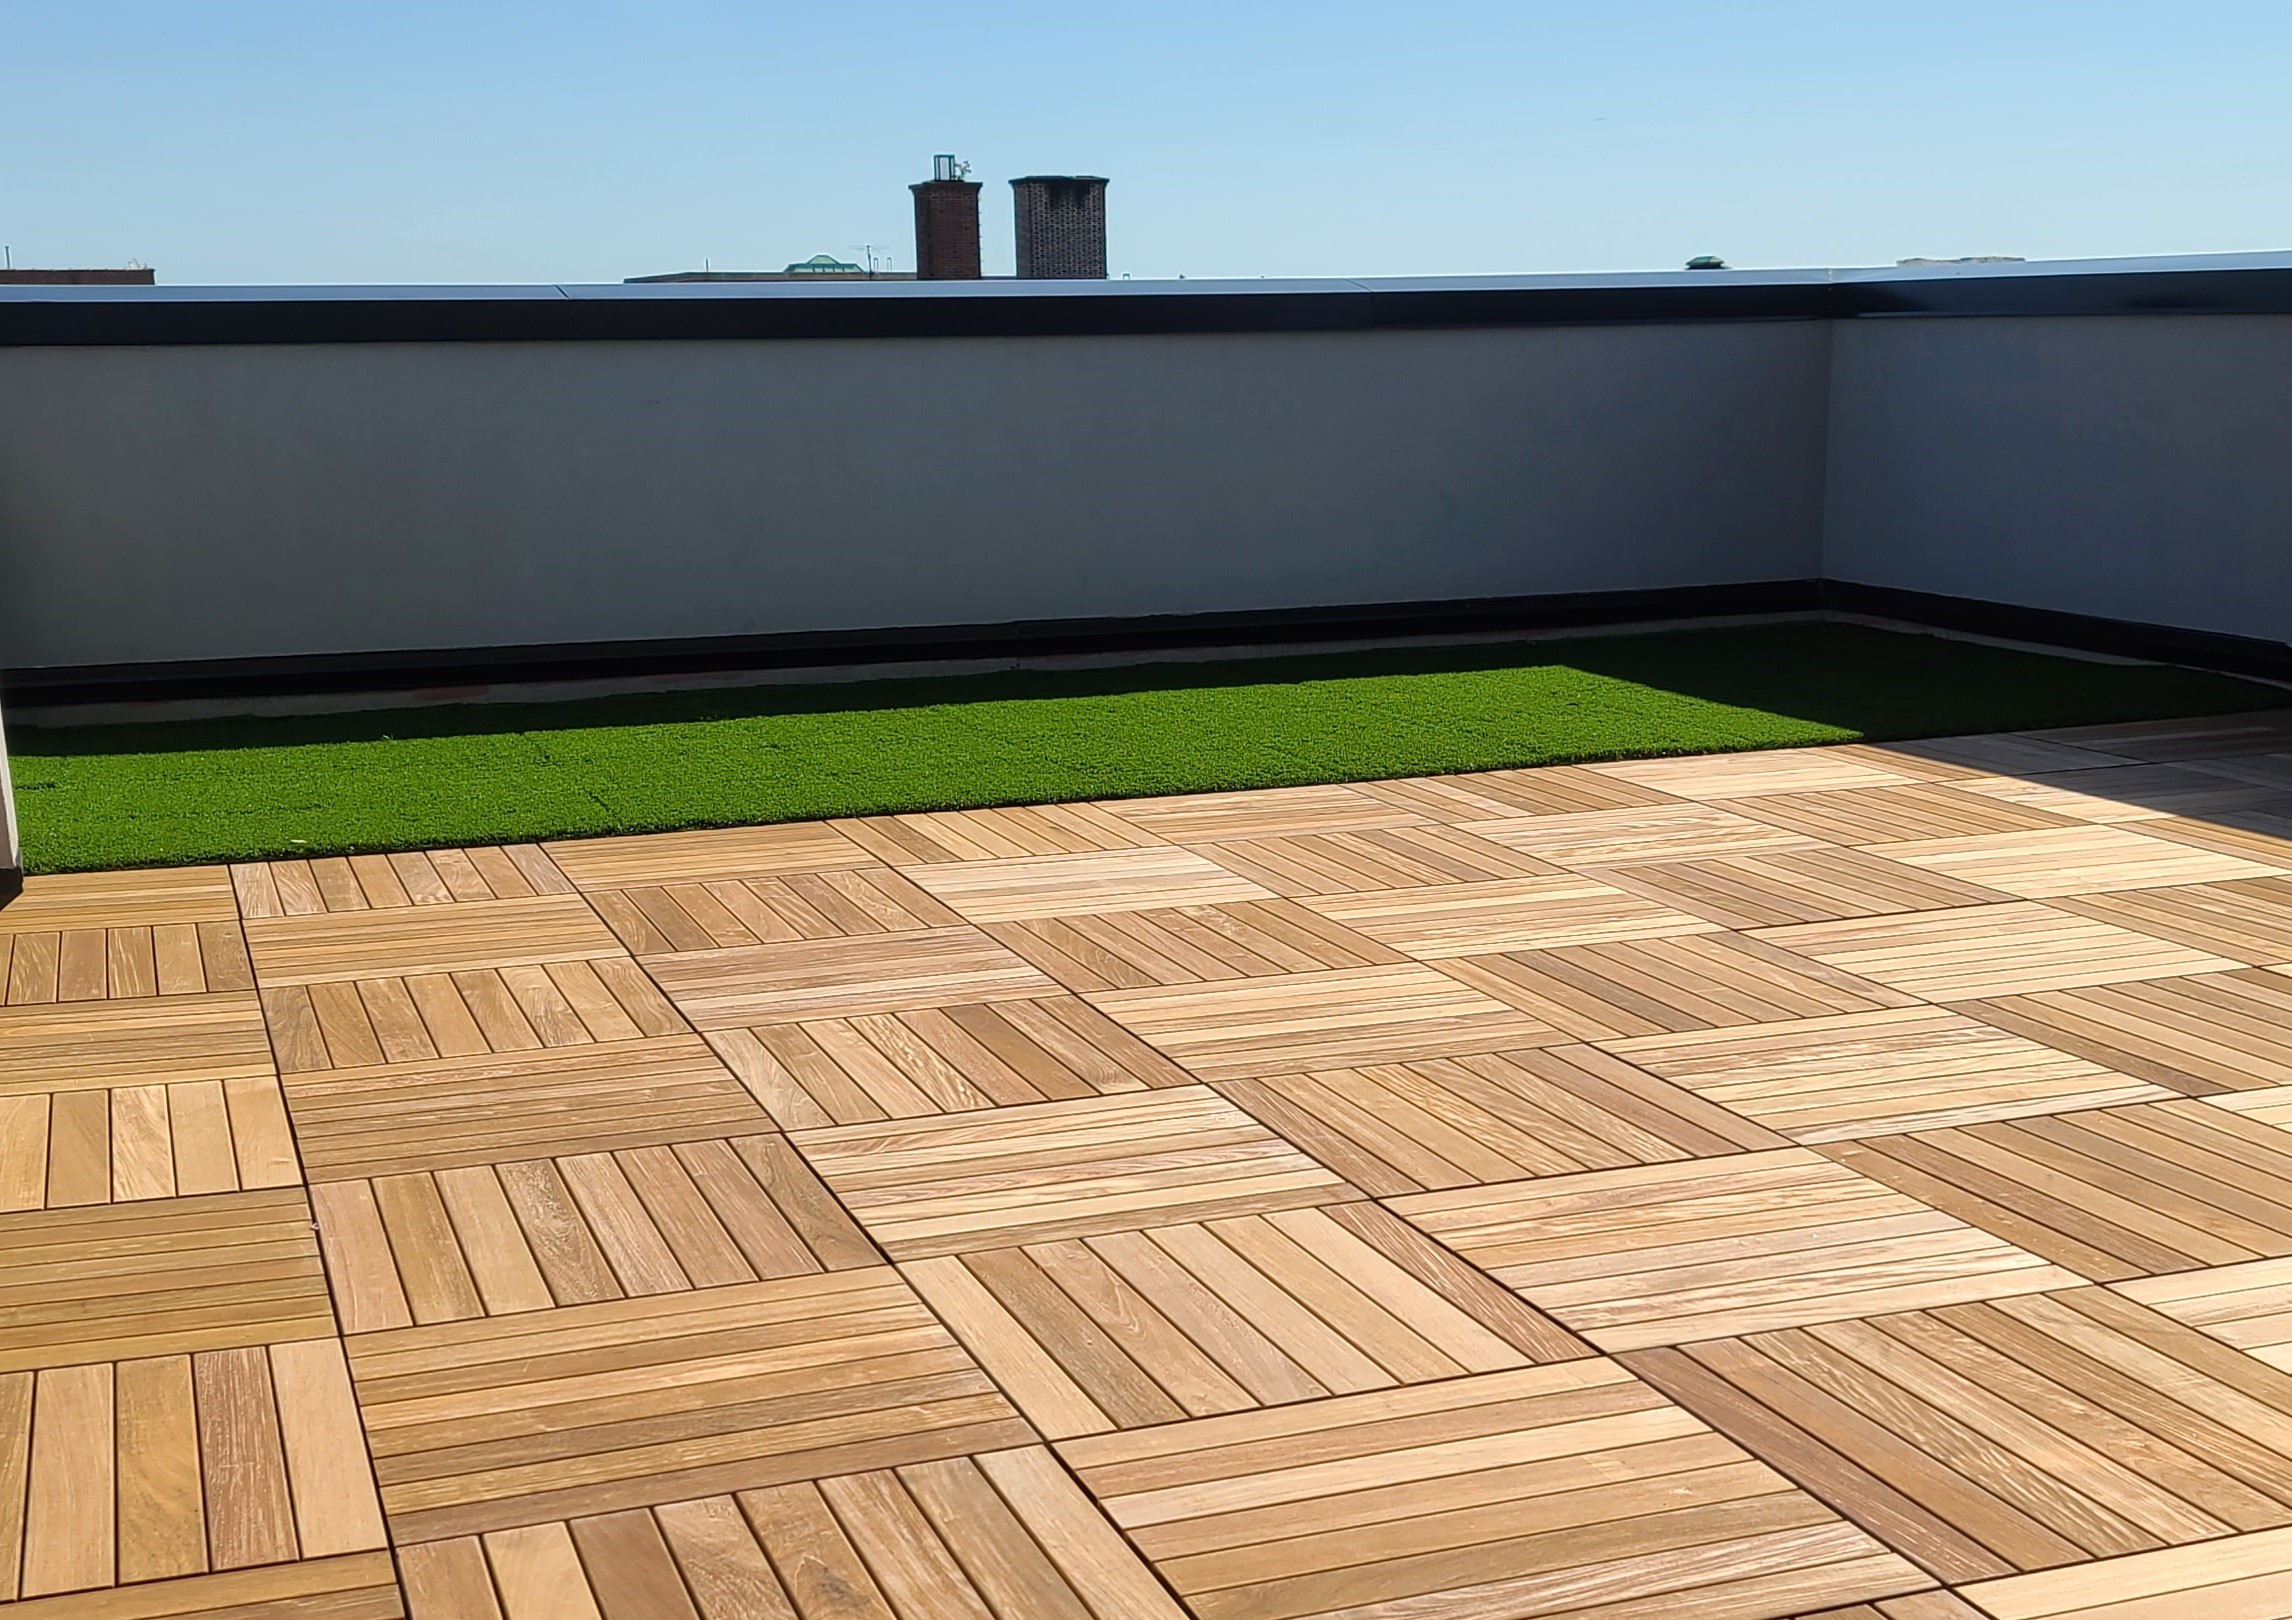 UNITY Turf-Top Tiles sitting flush with other product for smooth transition.